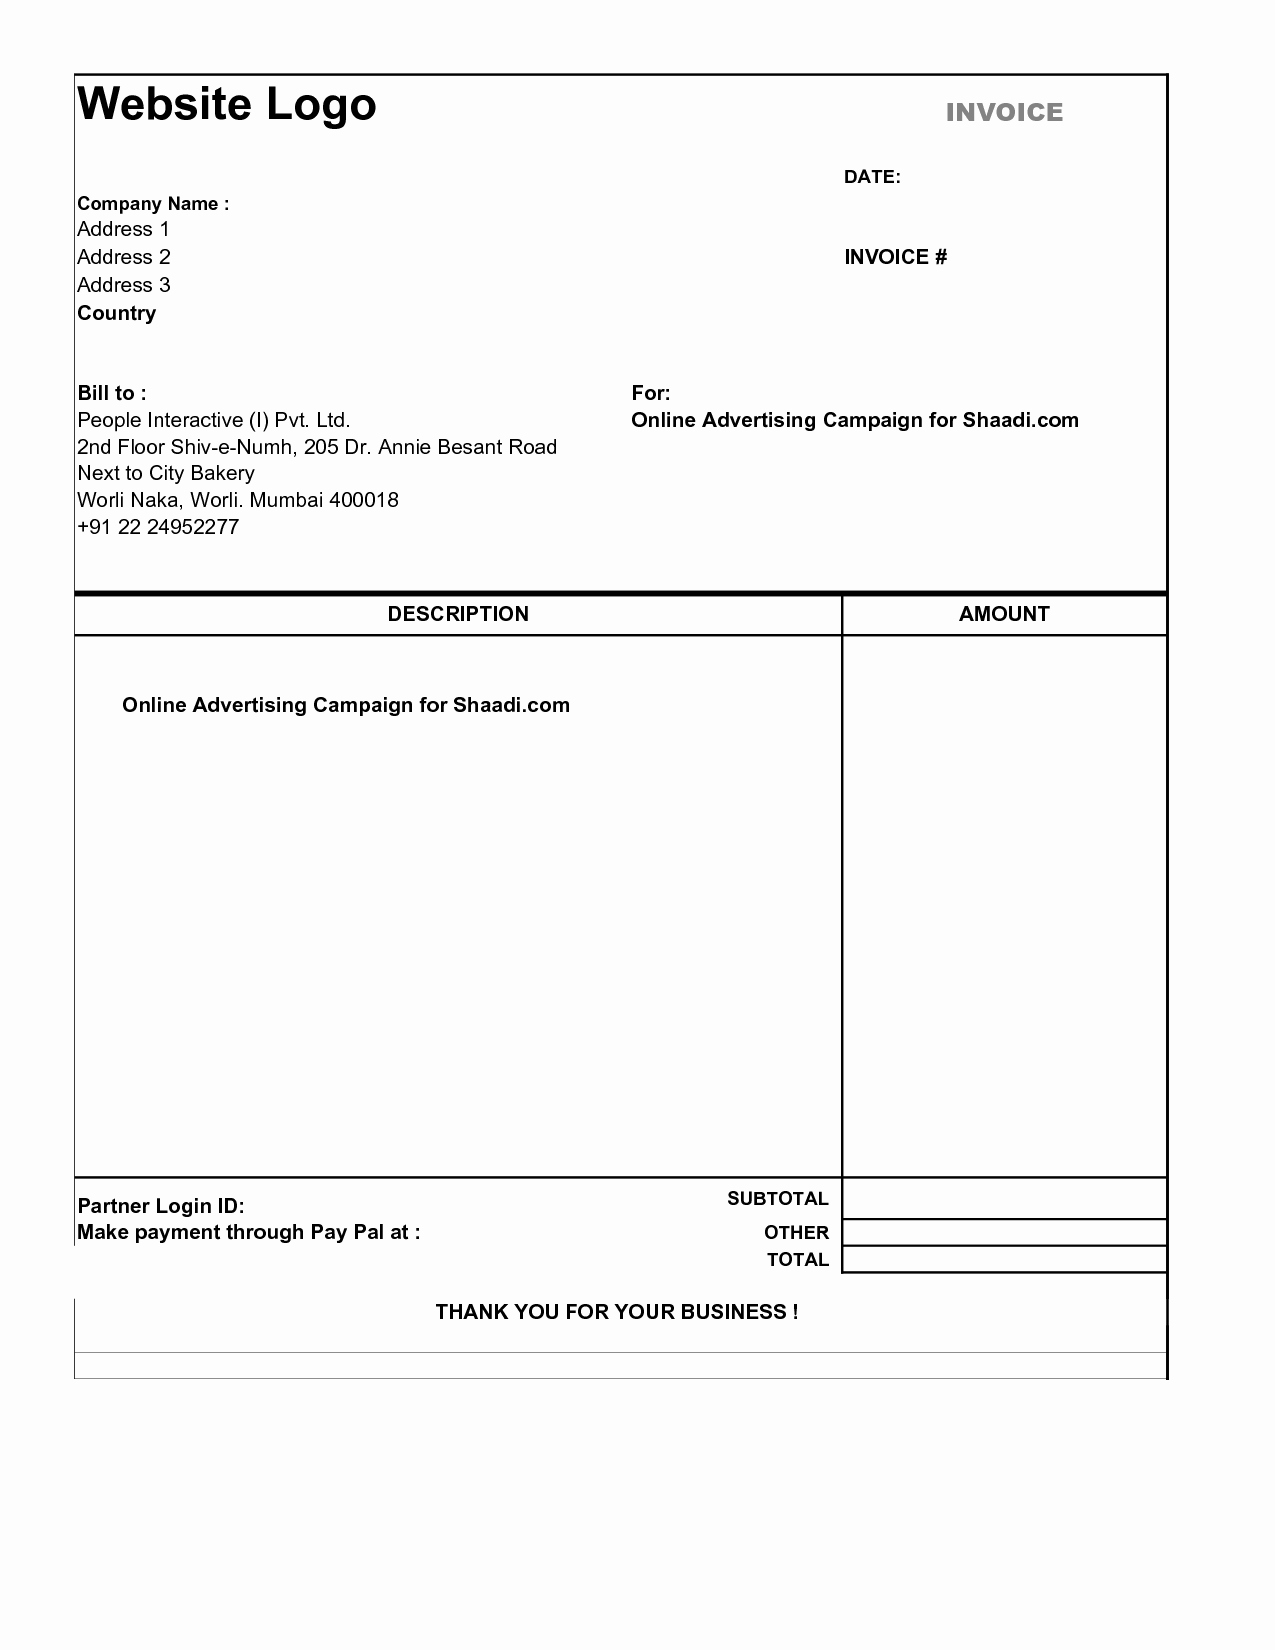 Simple Invoice form